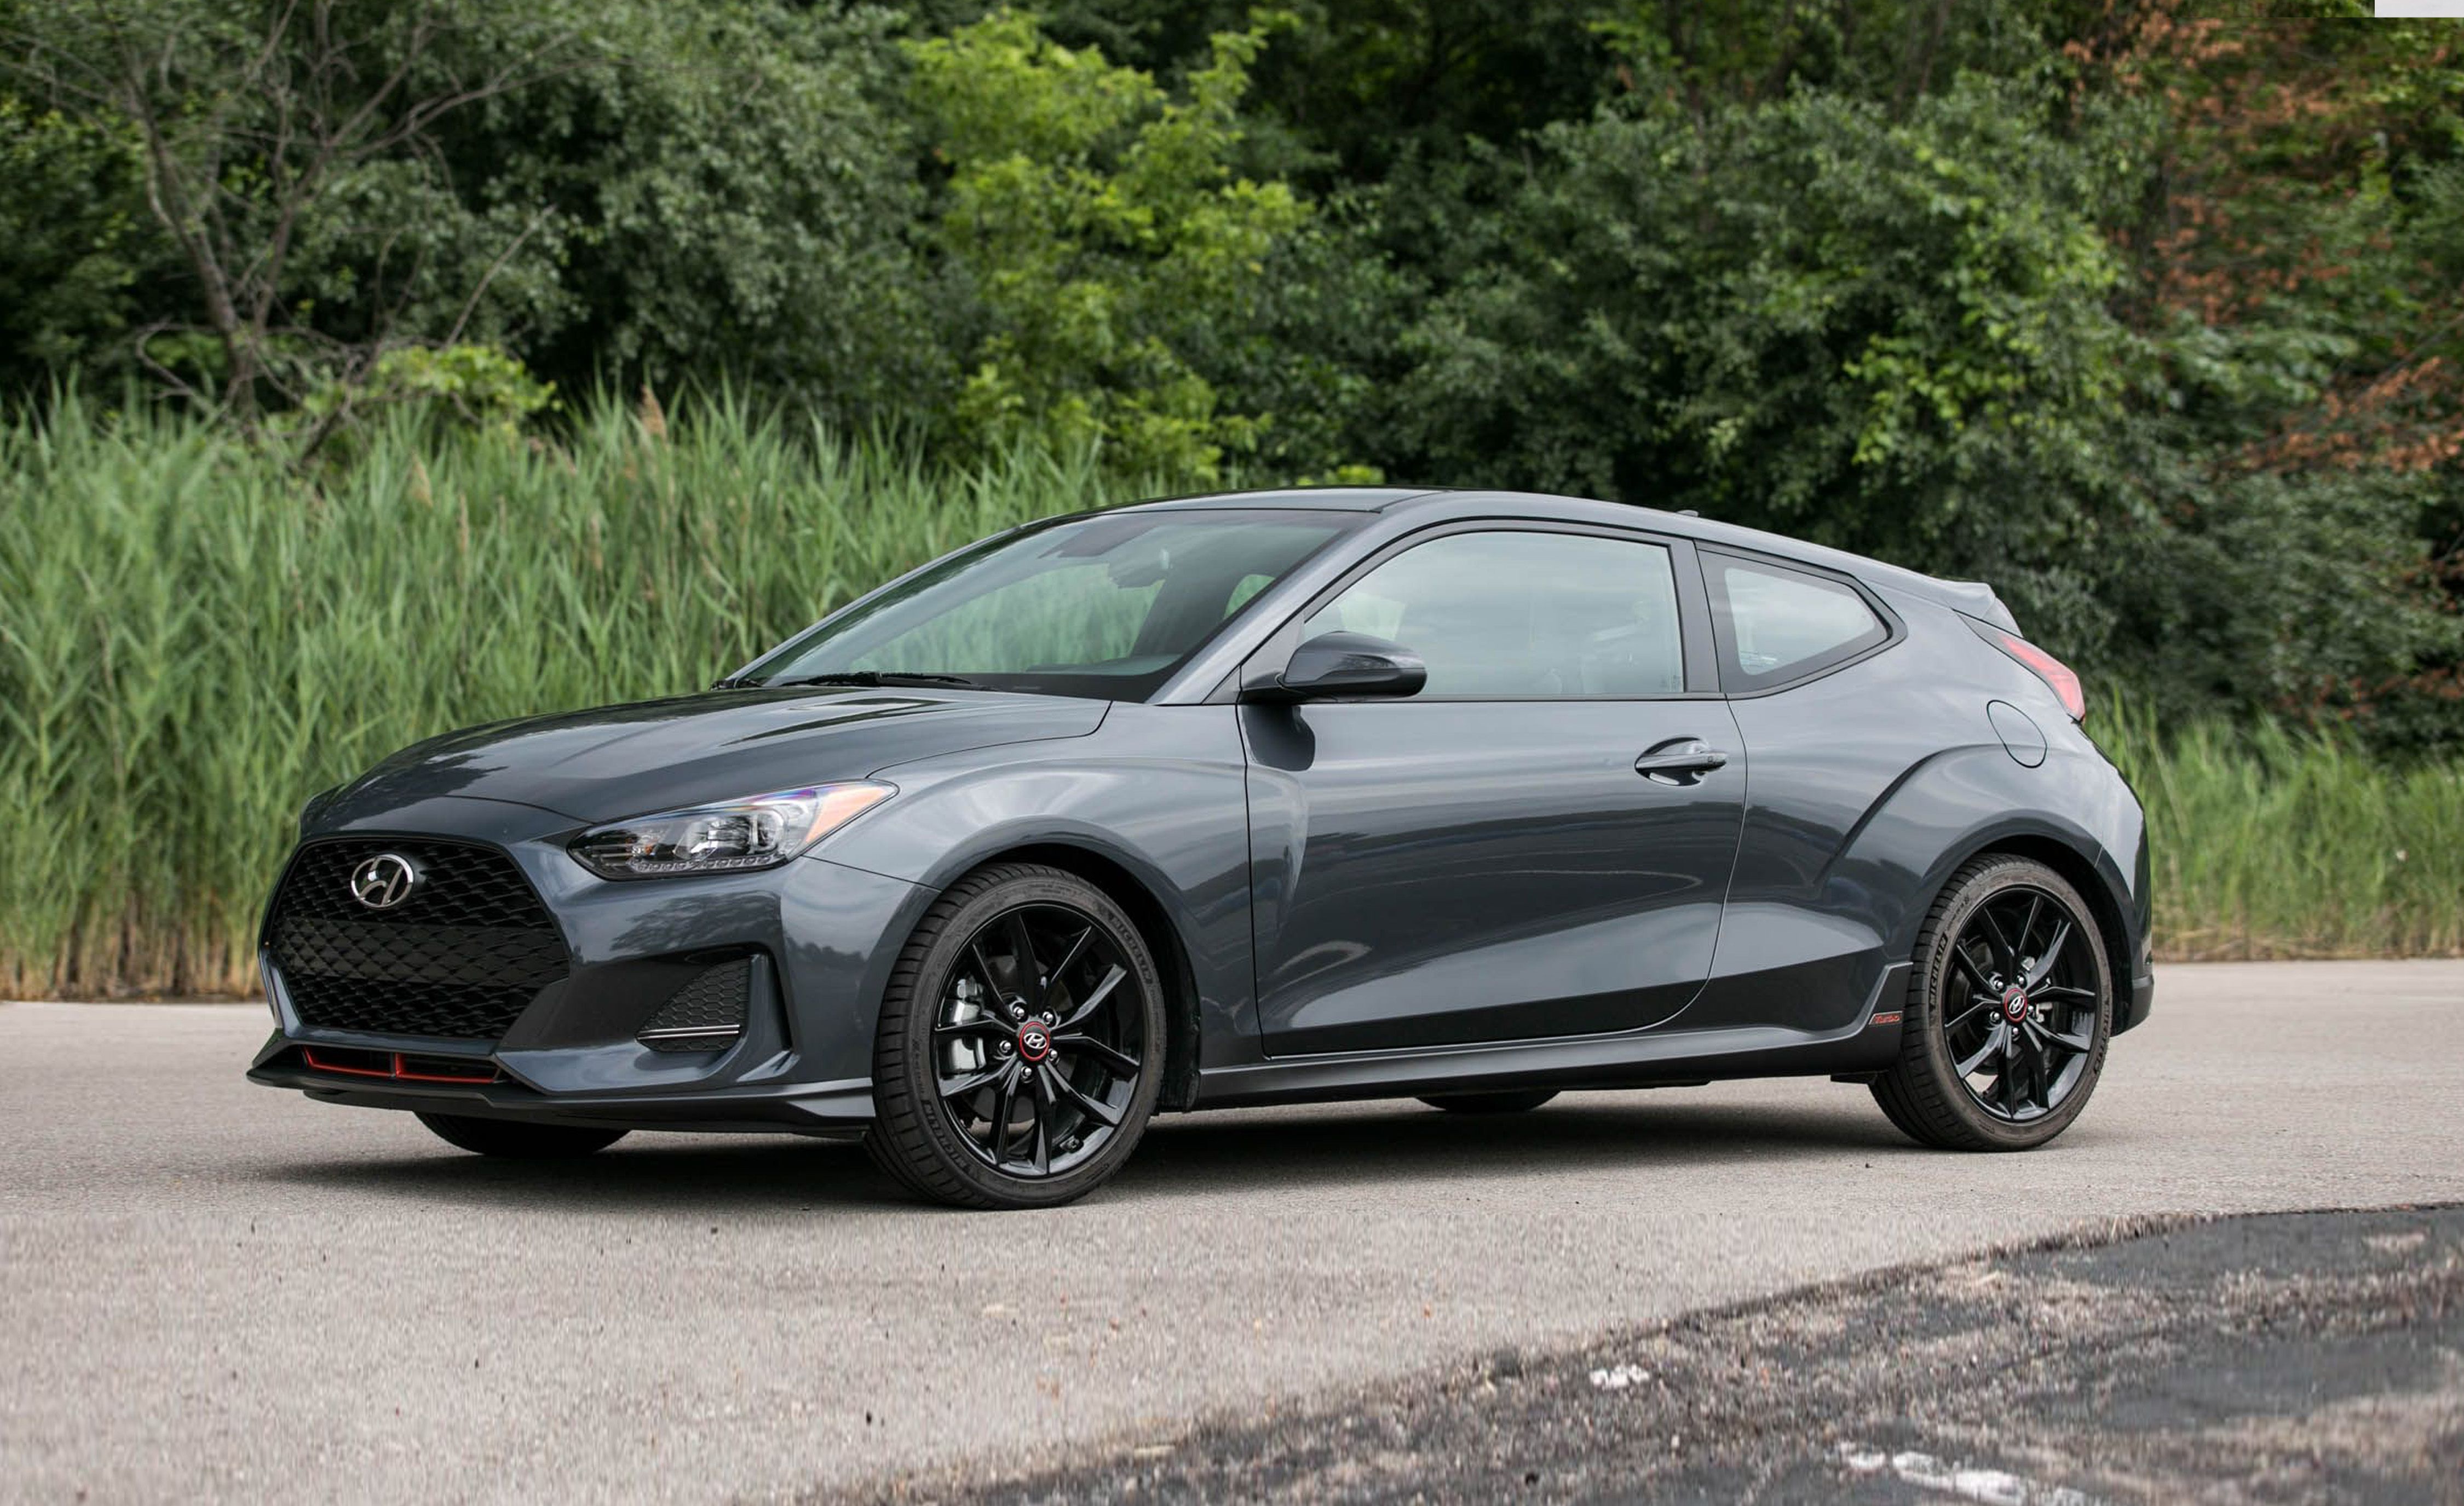 Hyundai Veloster N exterior restyling